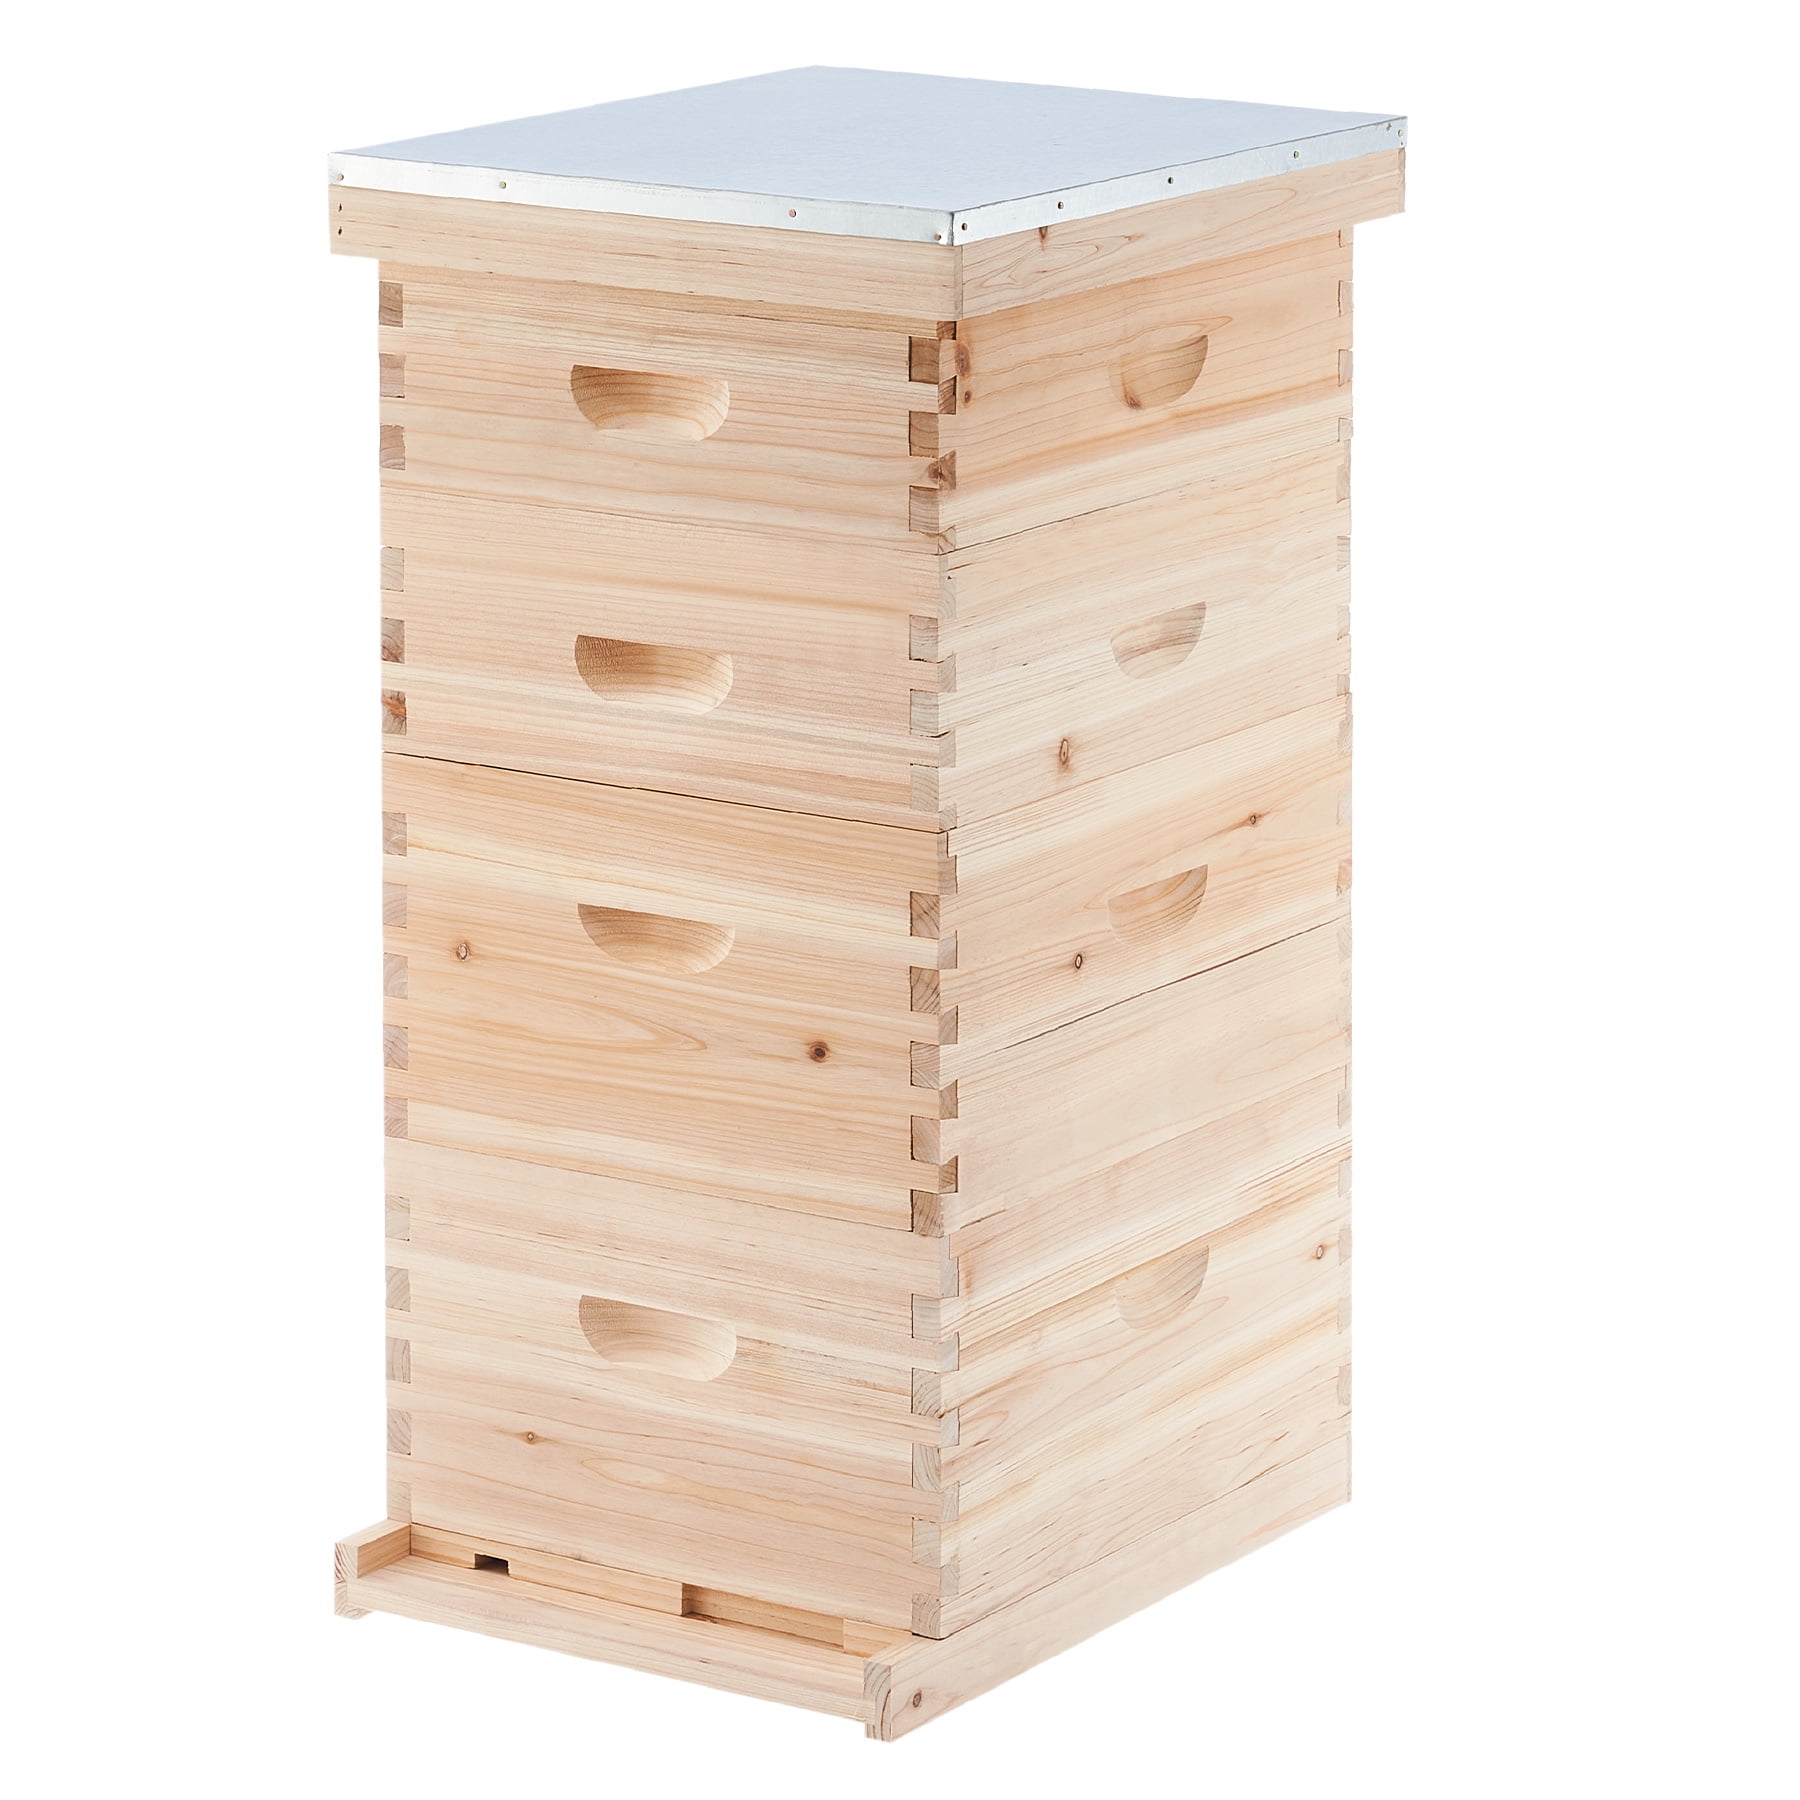 Details about   20 Deep 20 Medium Beekeeping Kit Bee Hive House Frame Beehive 40-Frame Size sas 